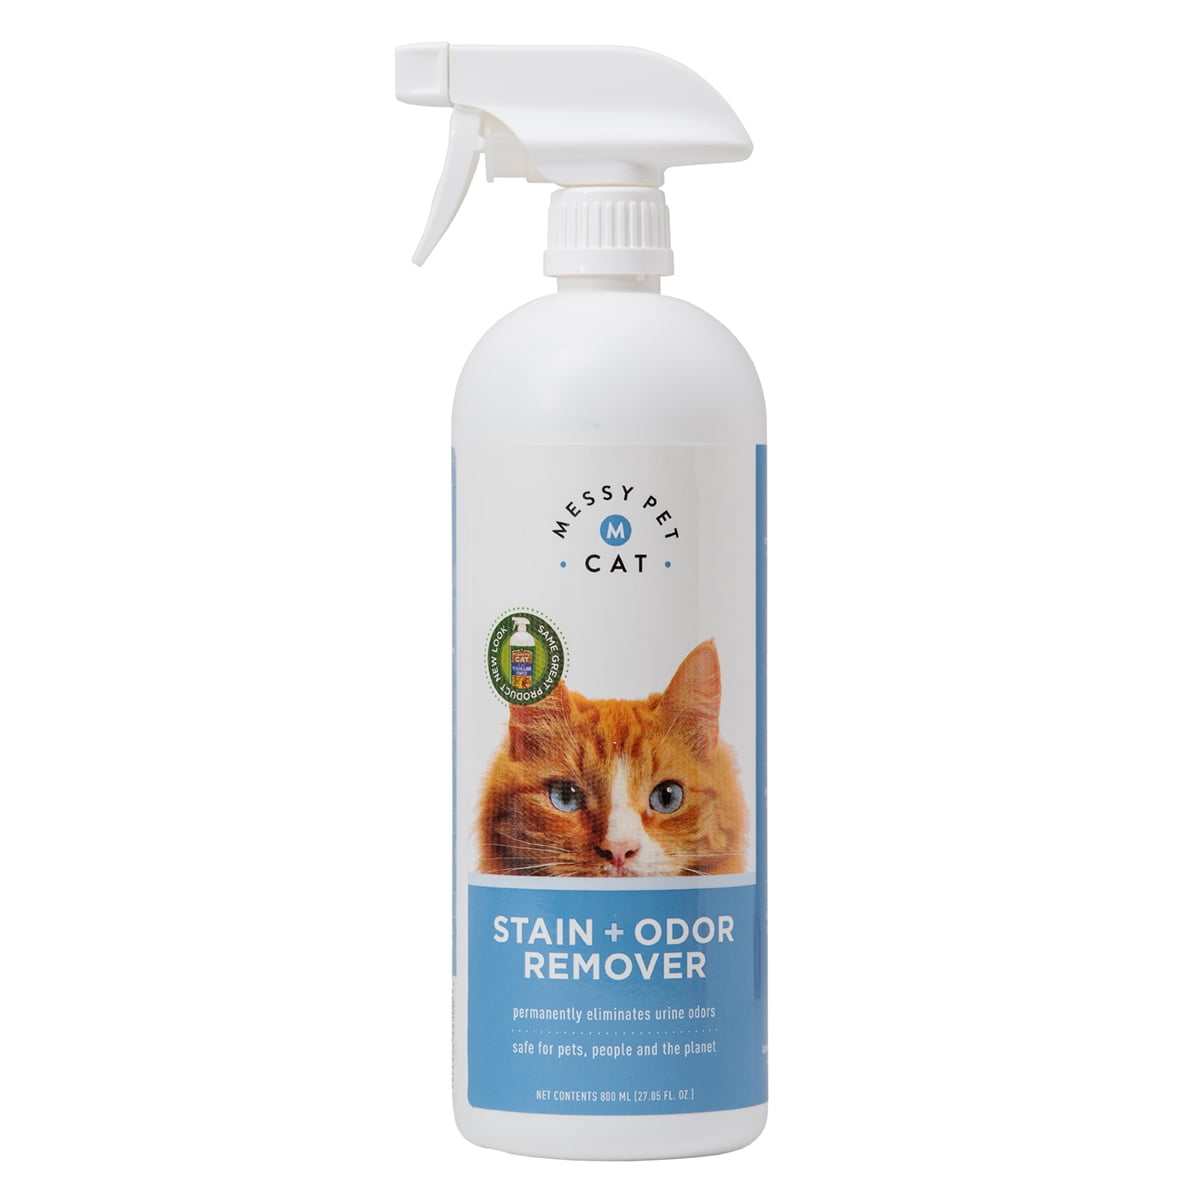 MESSY PET CAT Pet Stain Odor Remover with Natural Enzymes, 27.05 Fluid Ounce